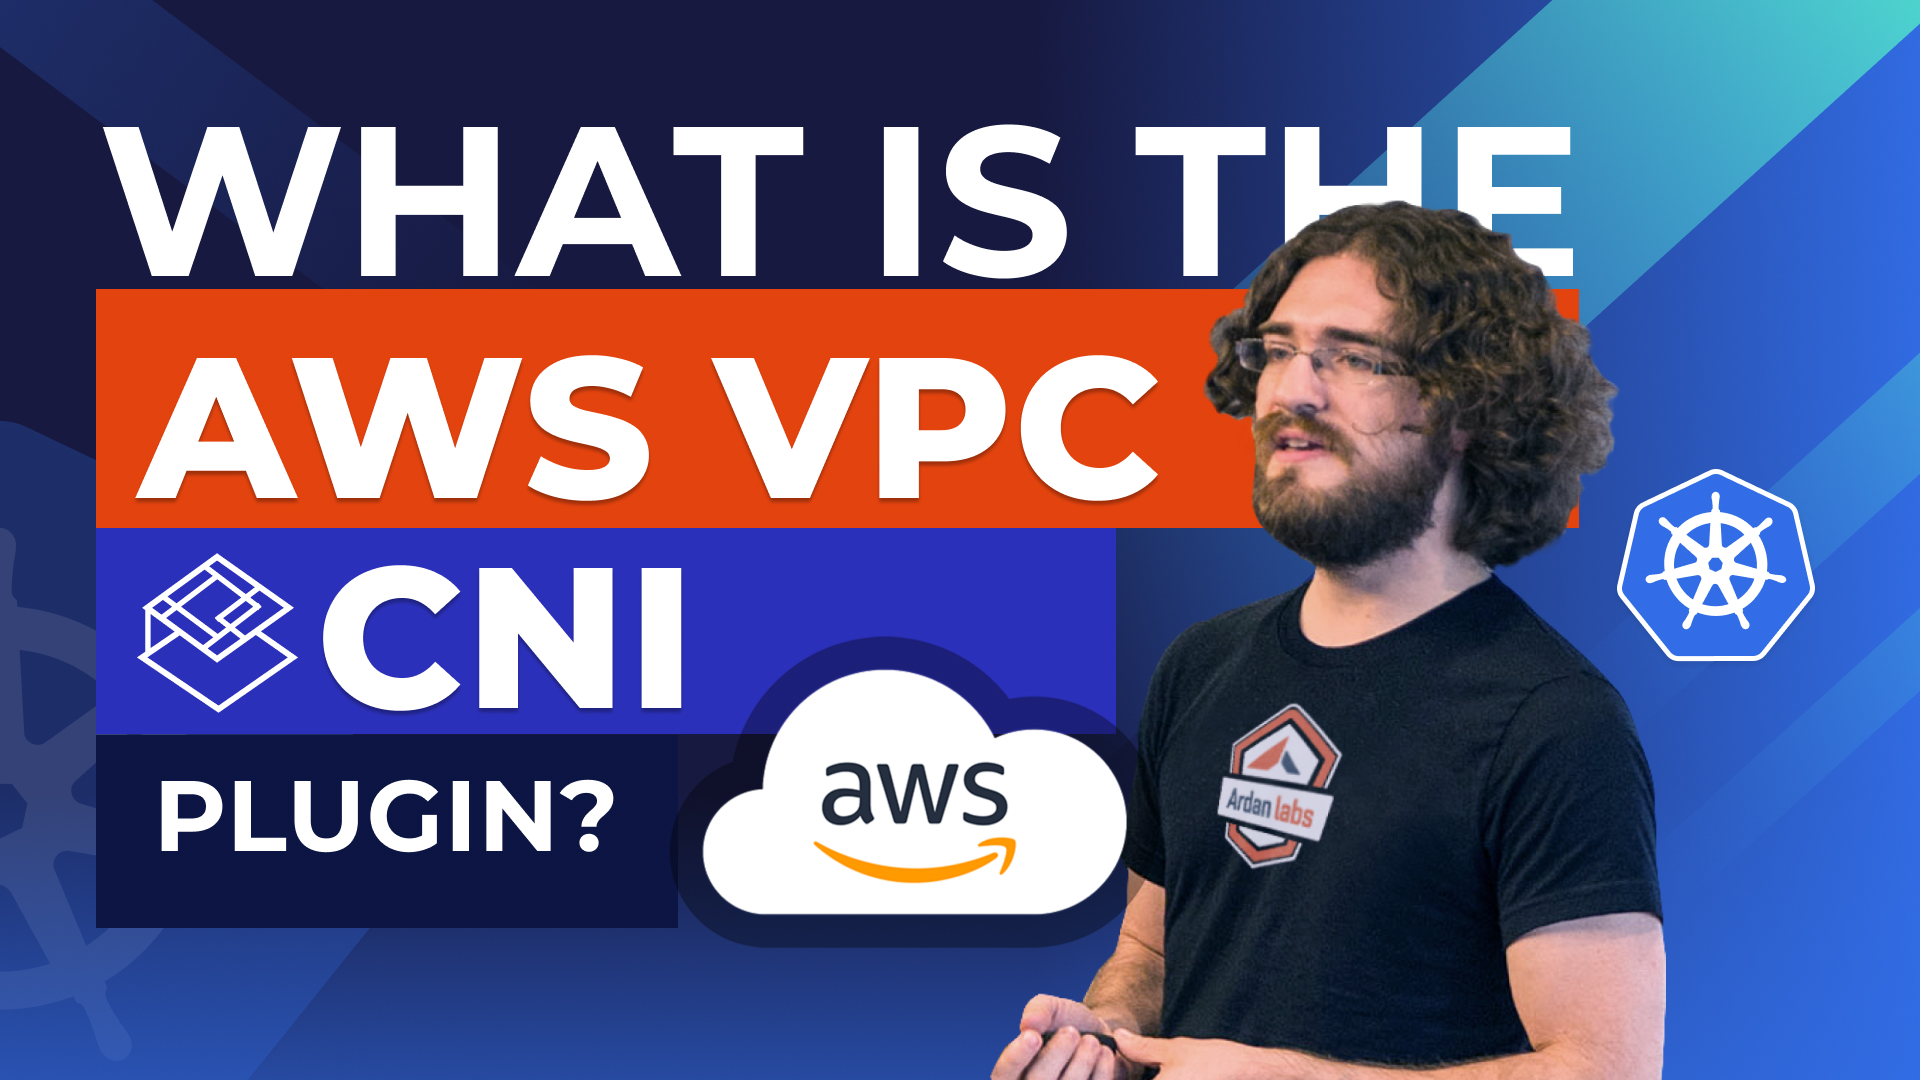 What is the AWS VPC CNI Plugin?